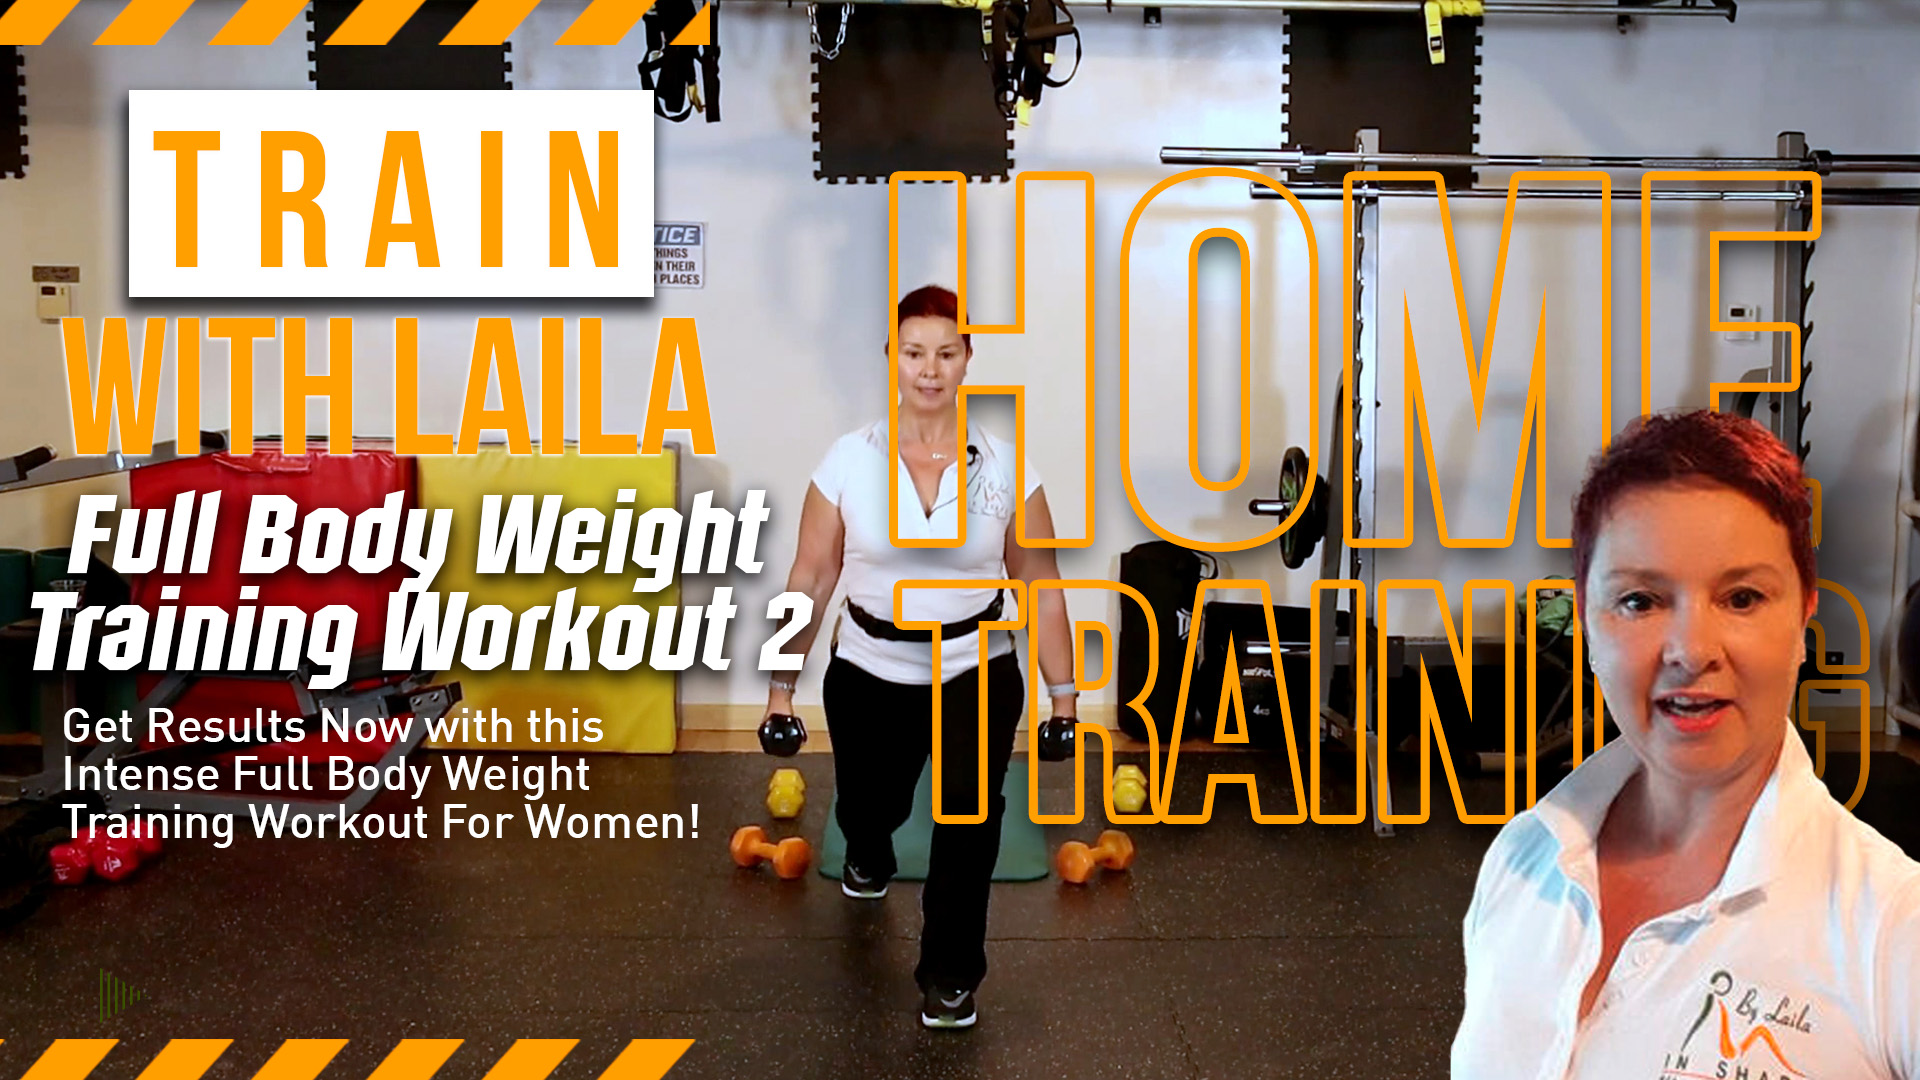 Full Body Weight Training Workout 2 For Women!